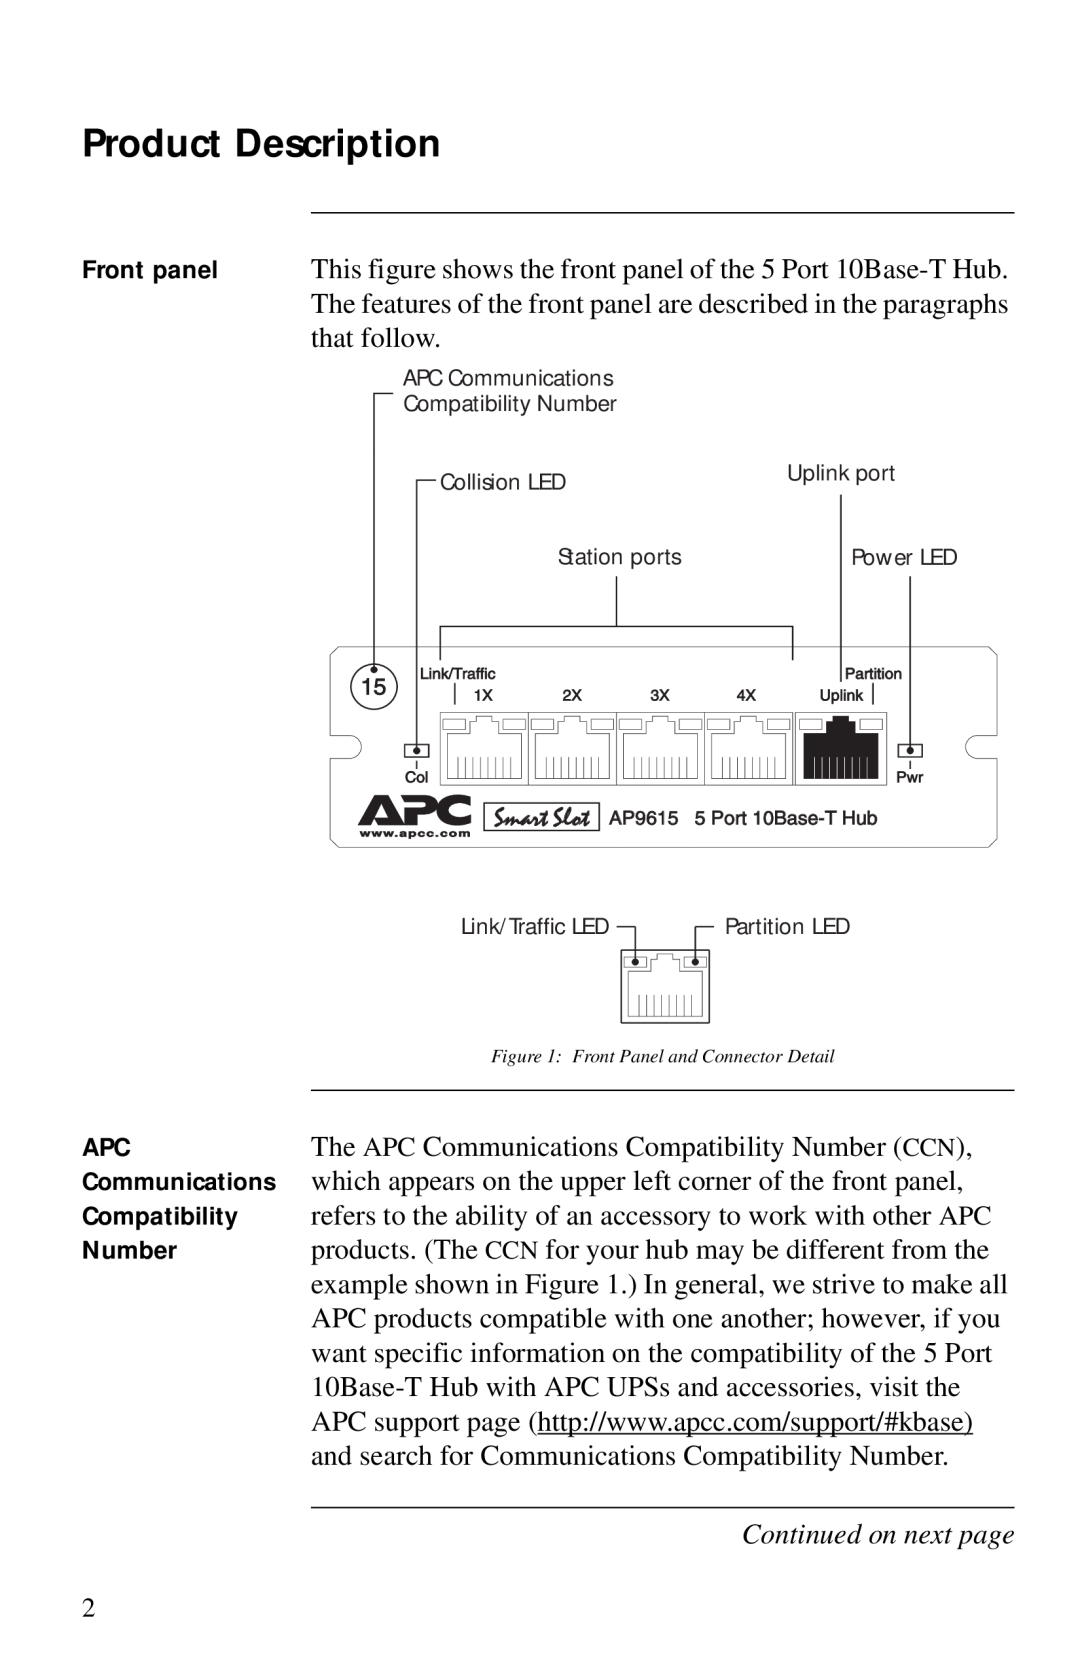 American Power Conversion AP9615 manual Product Description, Continued on next page 